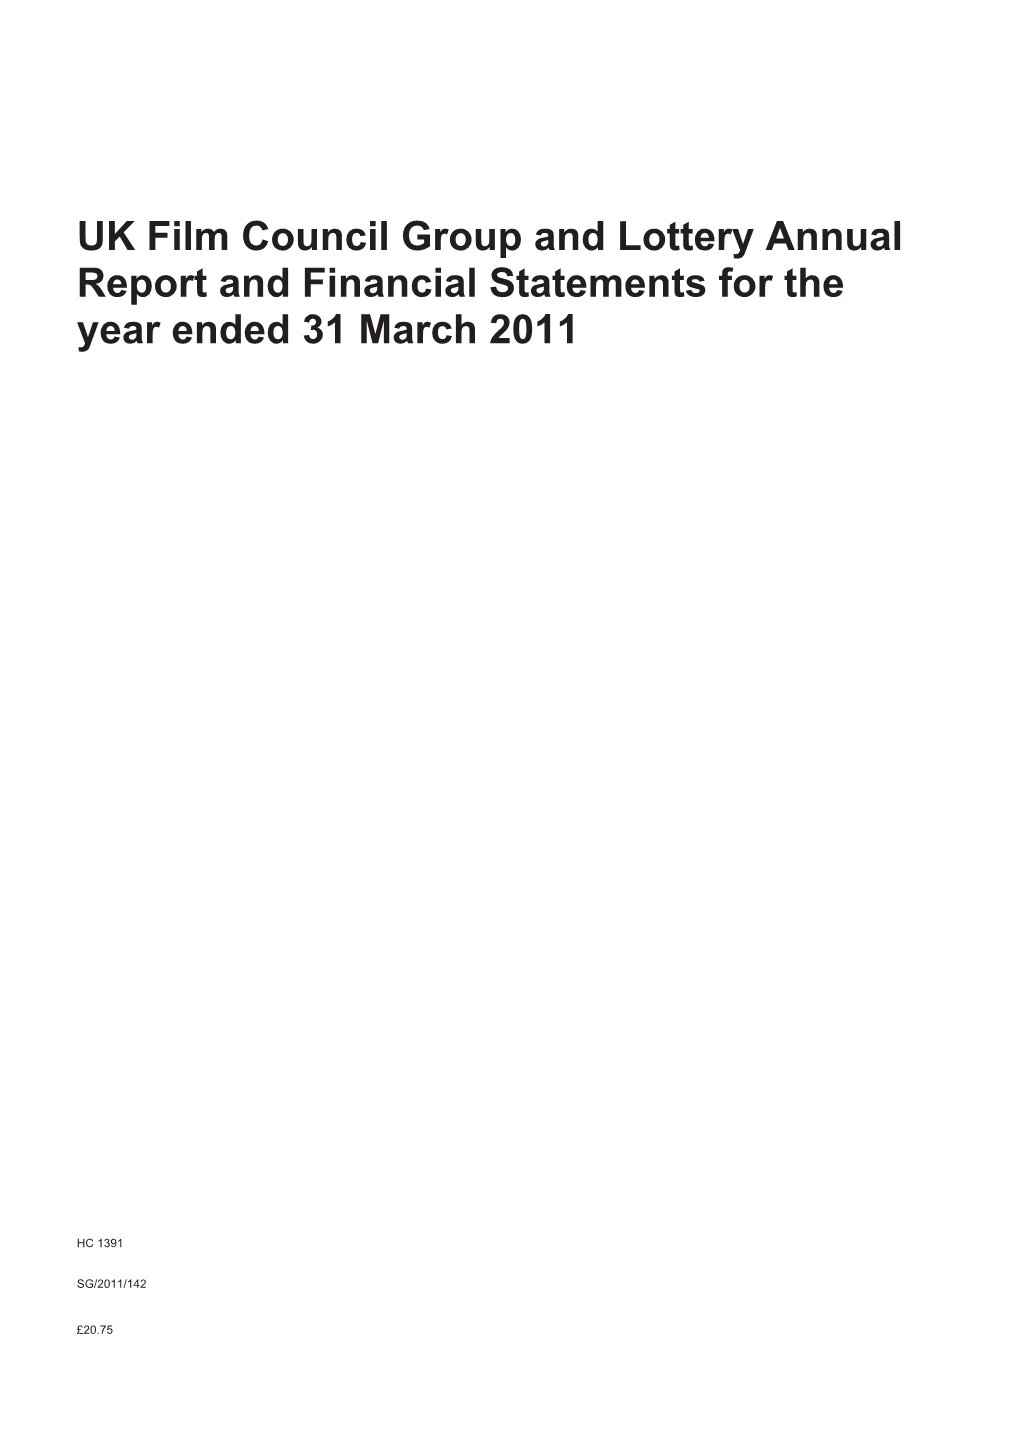 UK Film Council Group and Lottery Annual Report and Financial Statements for the Year Ended 31 March 2011